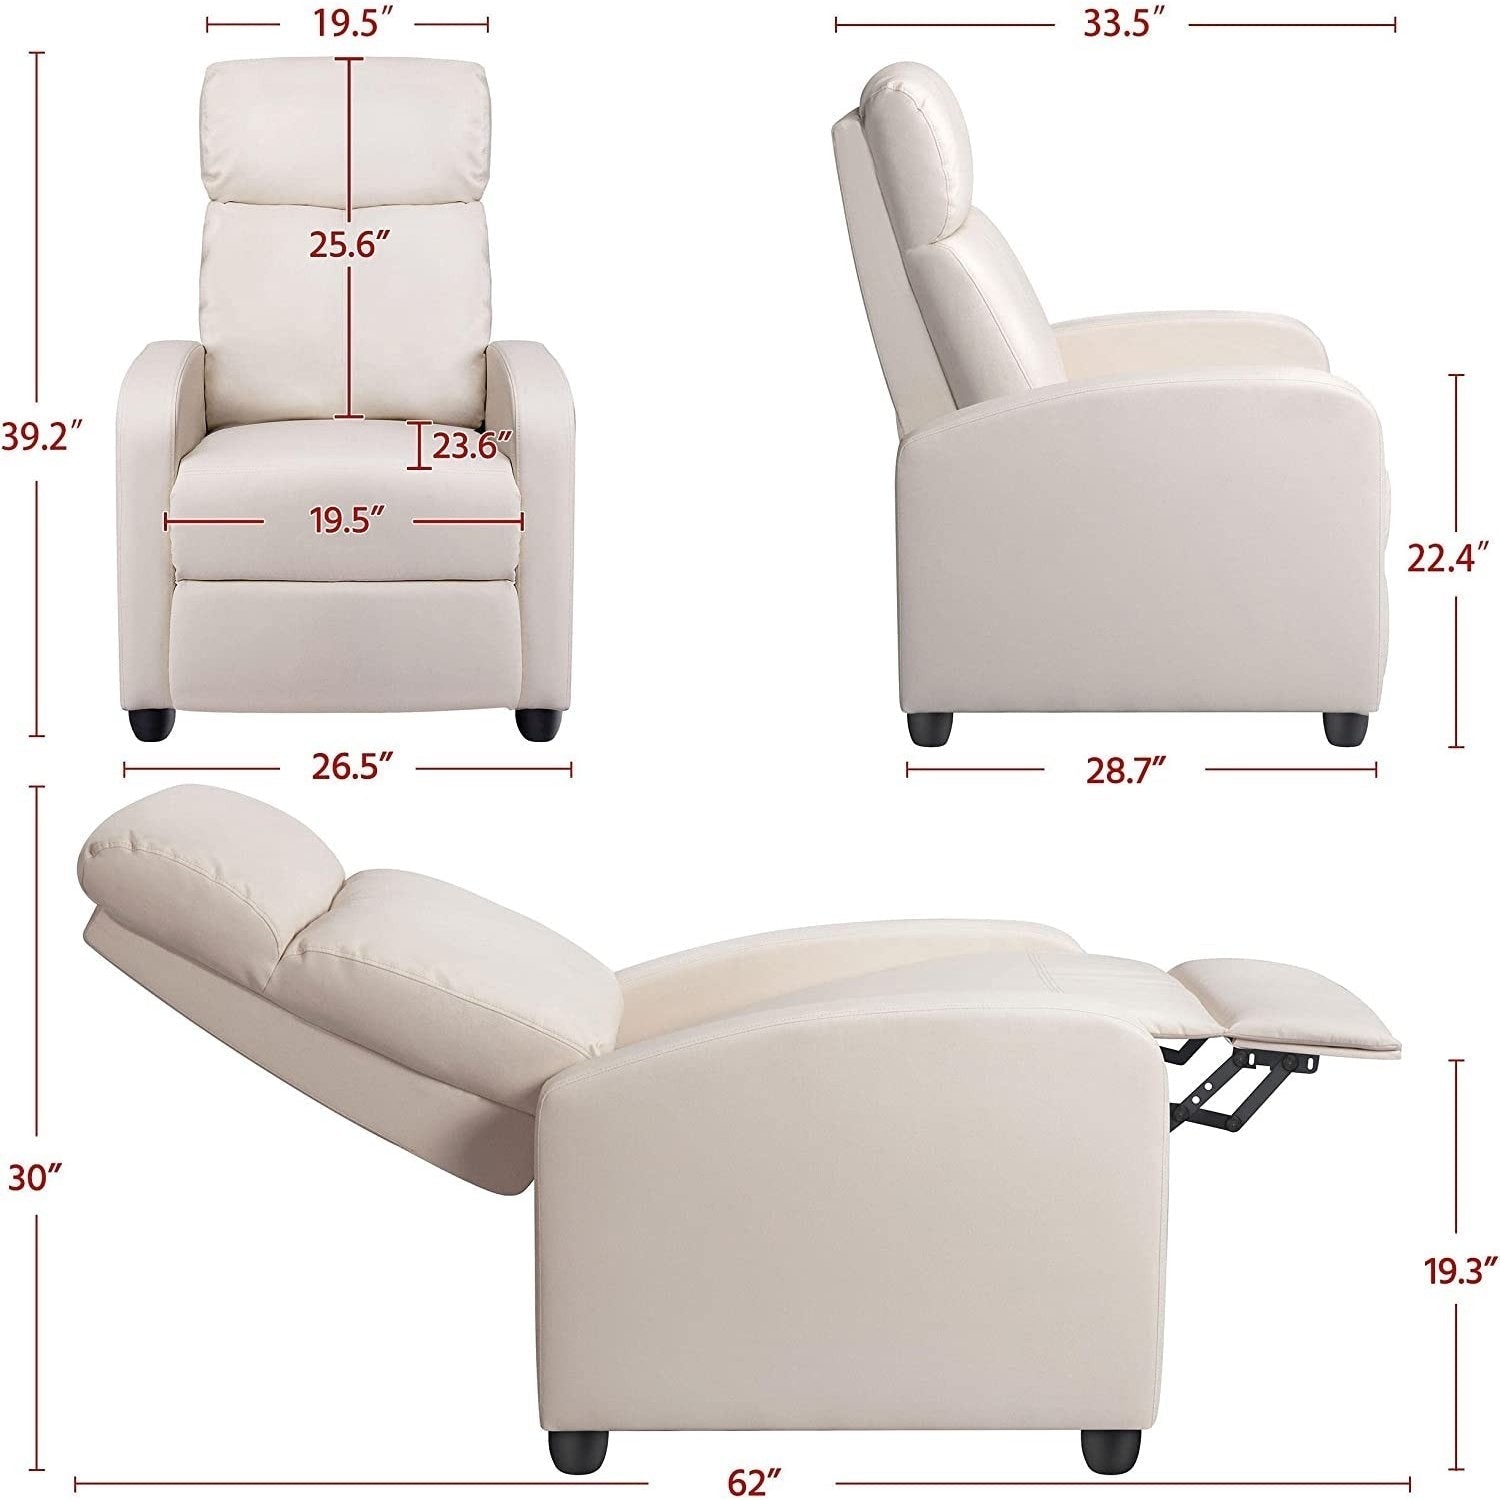 Living Room > Recliners And Chaise Lounge - Off White High-Density Faux Leather Push Back Recliner Chair